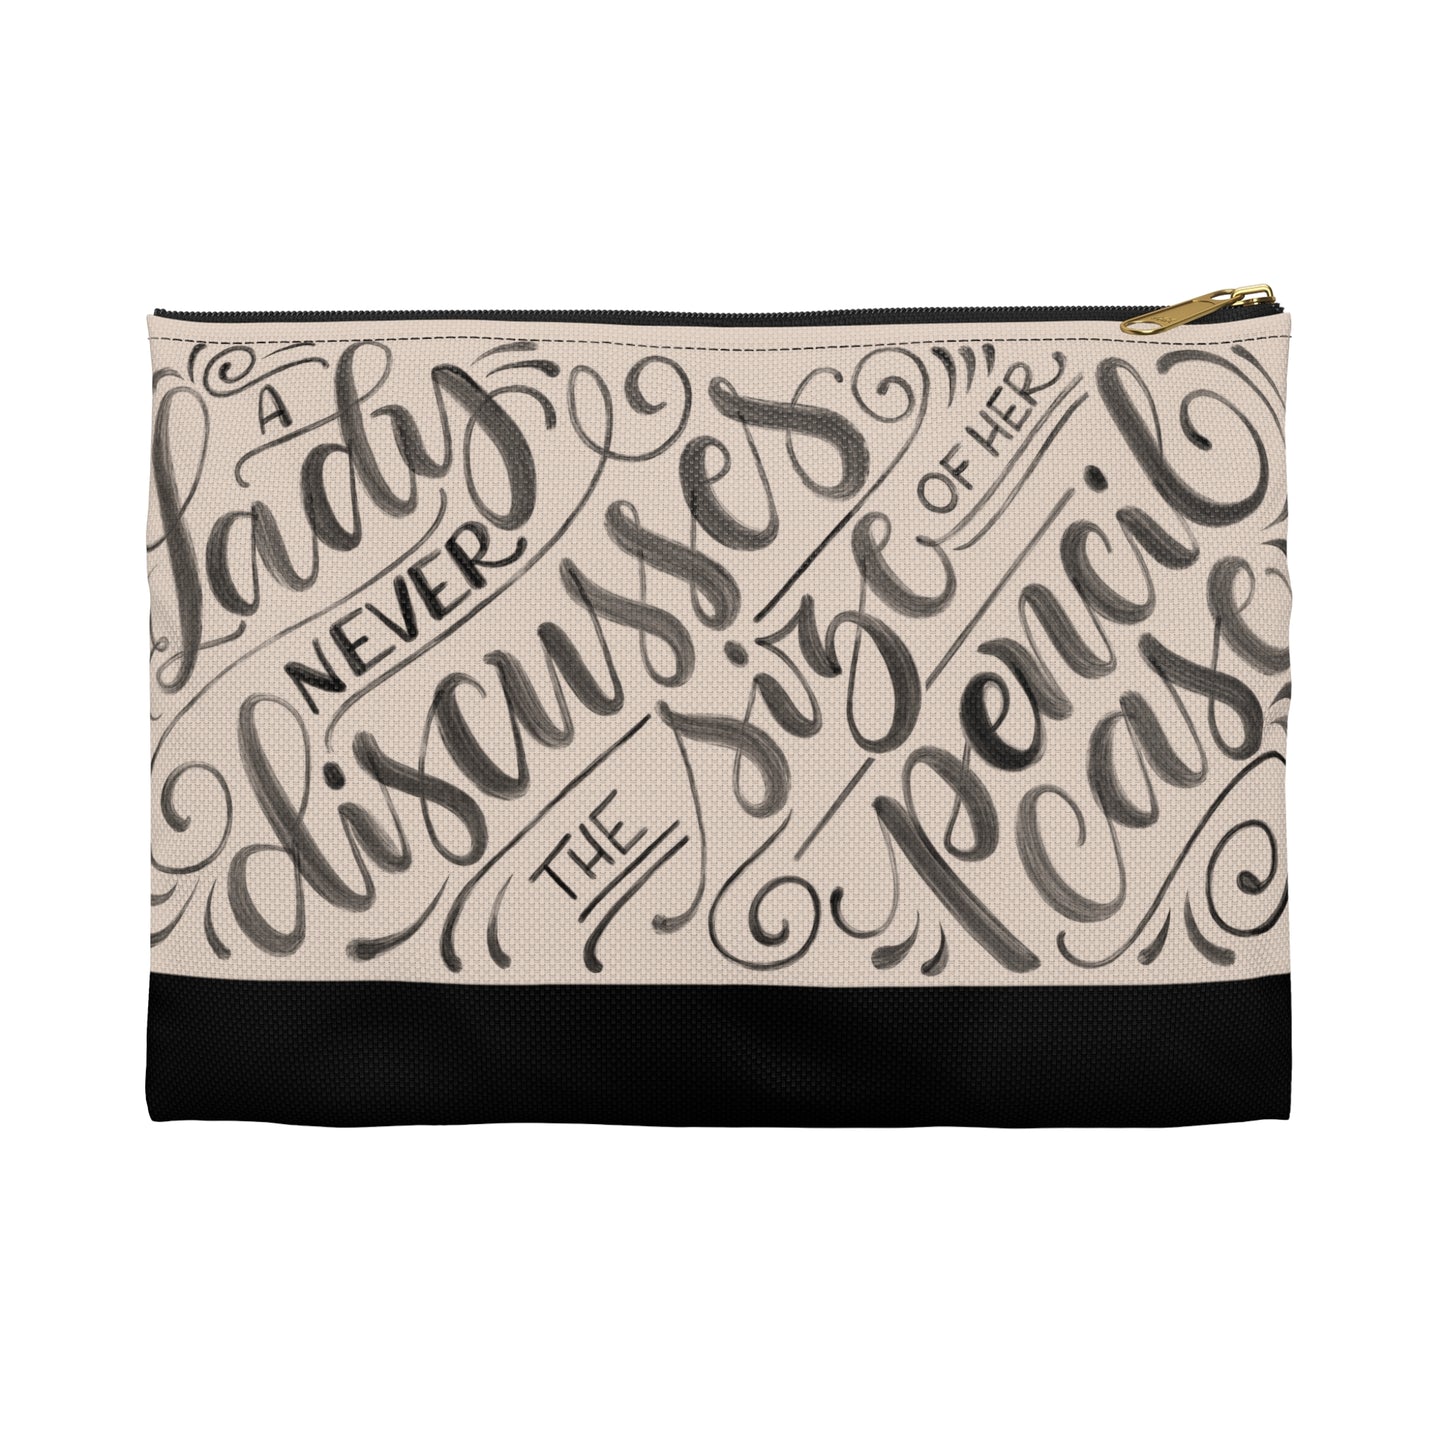 A lady never discusses the size of her pencil case - Tan Zipped Pouch - howjoyfulshop